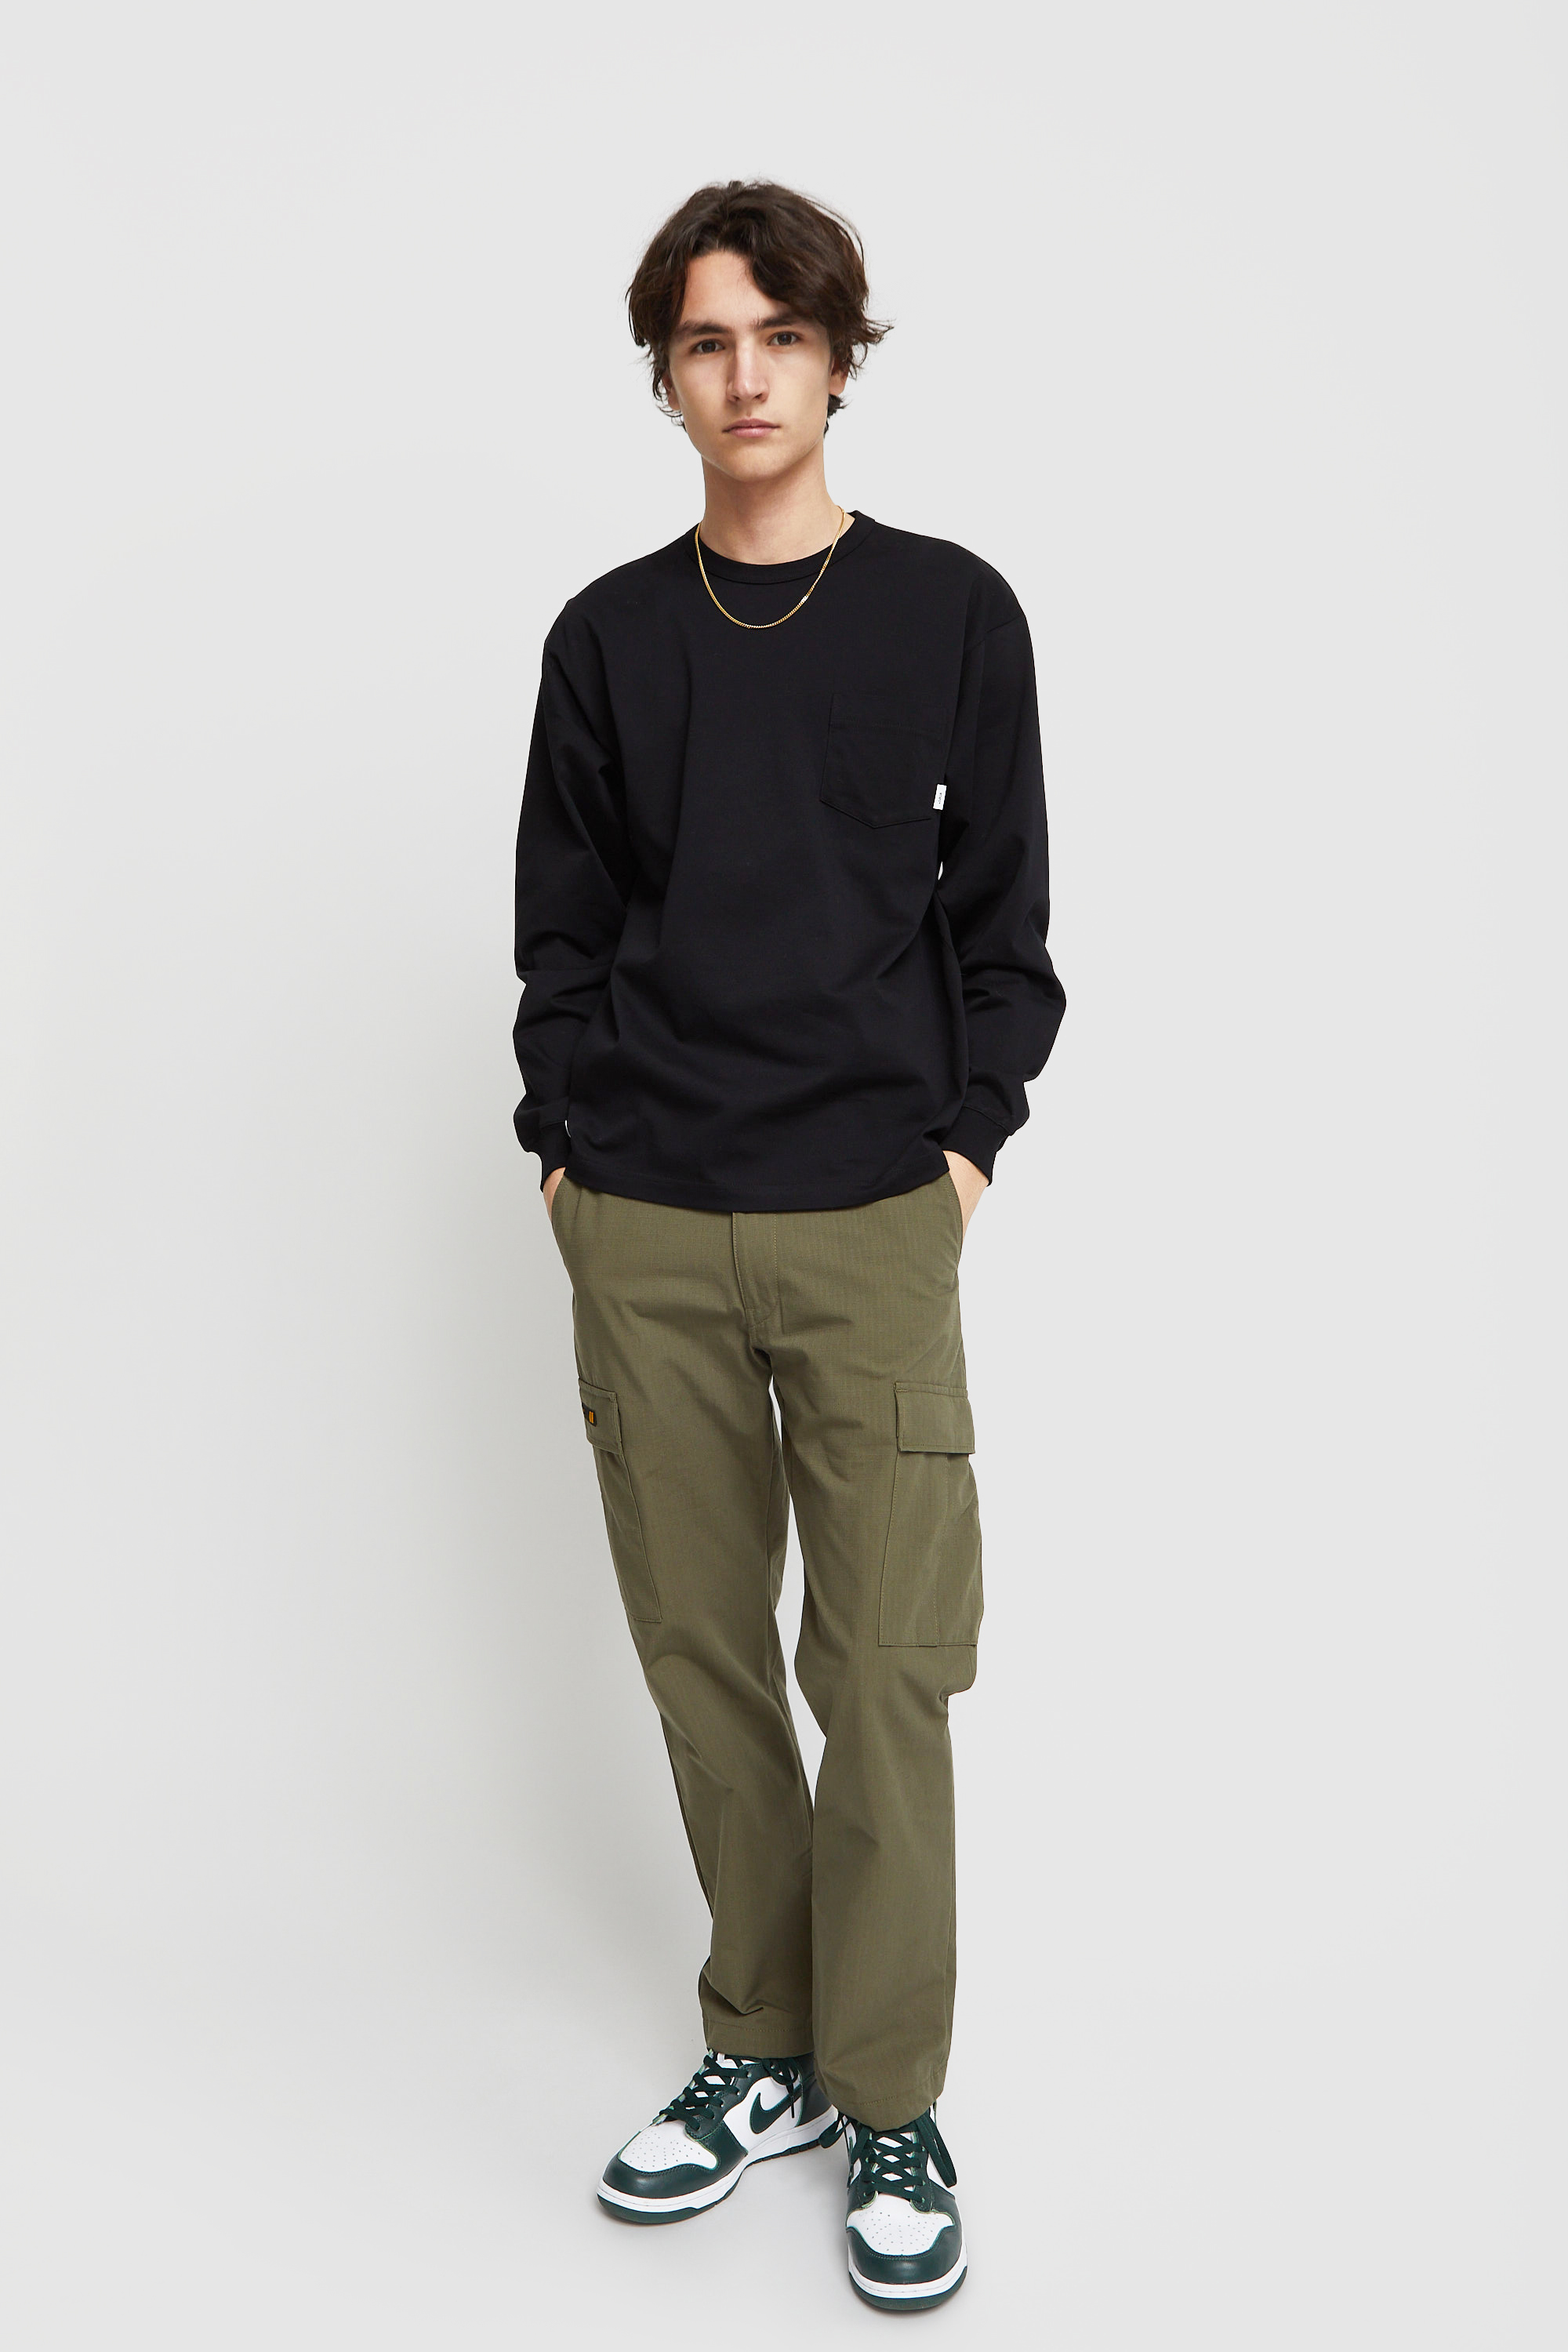 WTAPS JUNGLE STOCK TROUSERS NYCO RIPSTOP